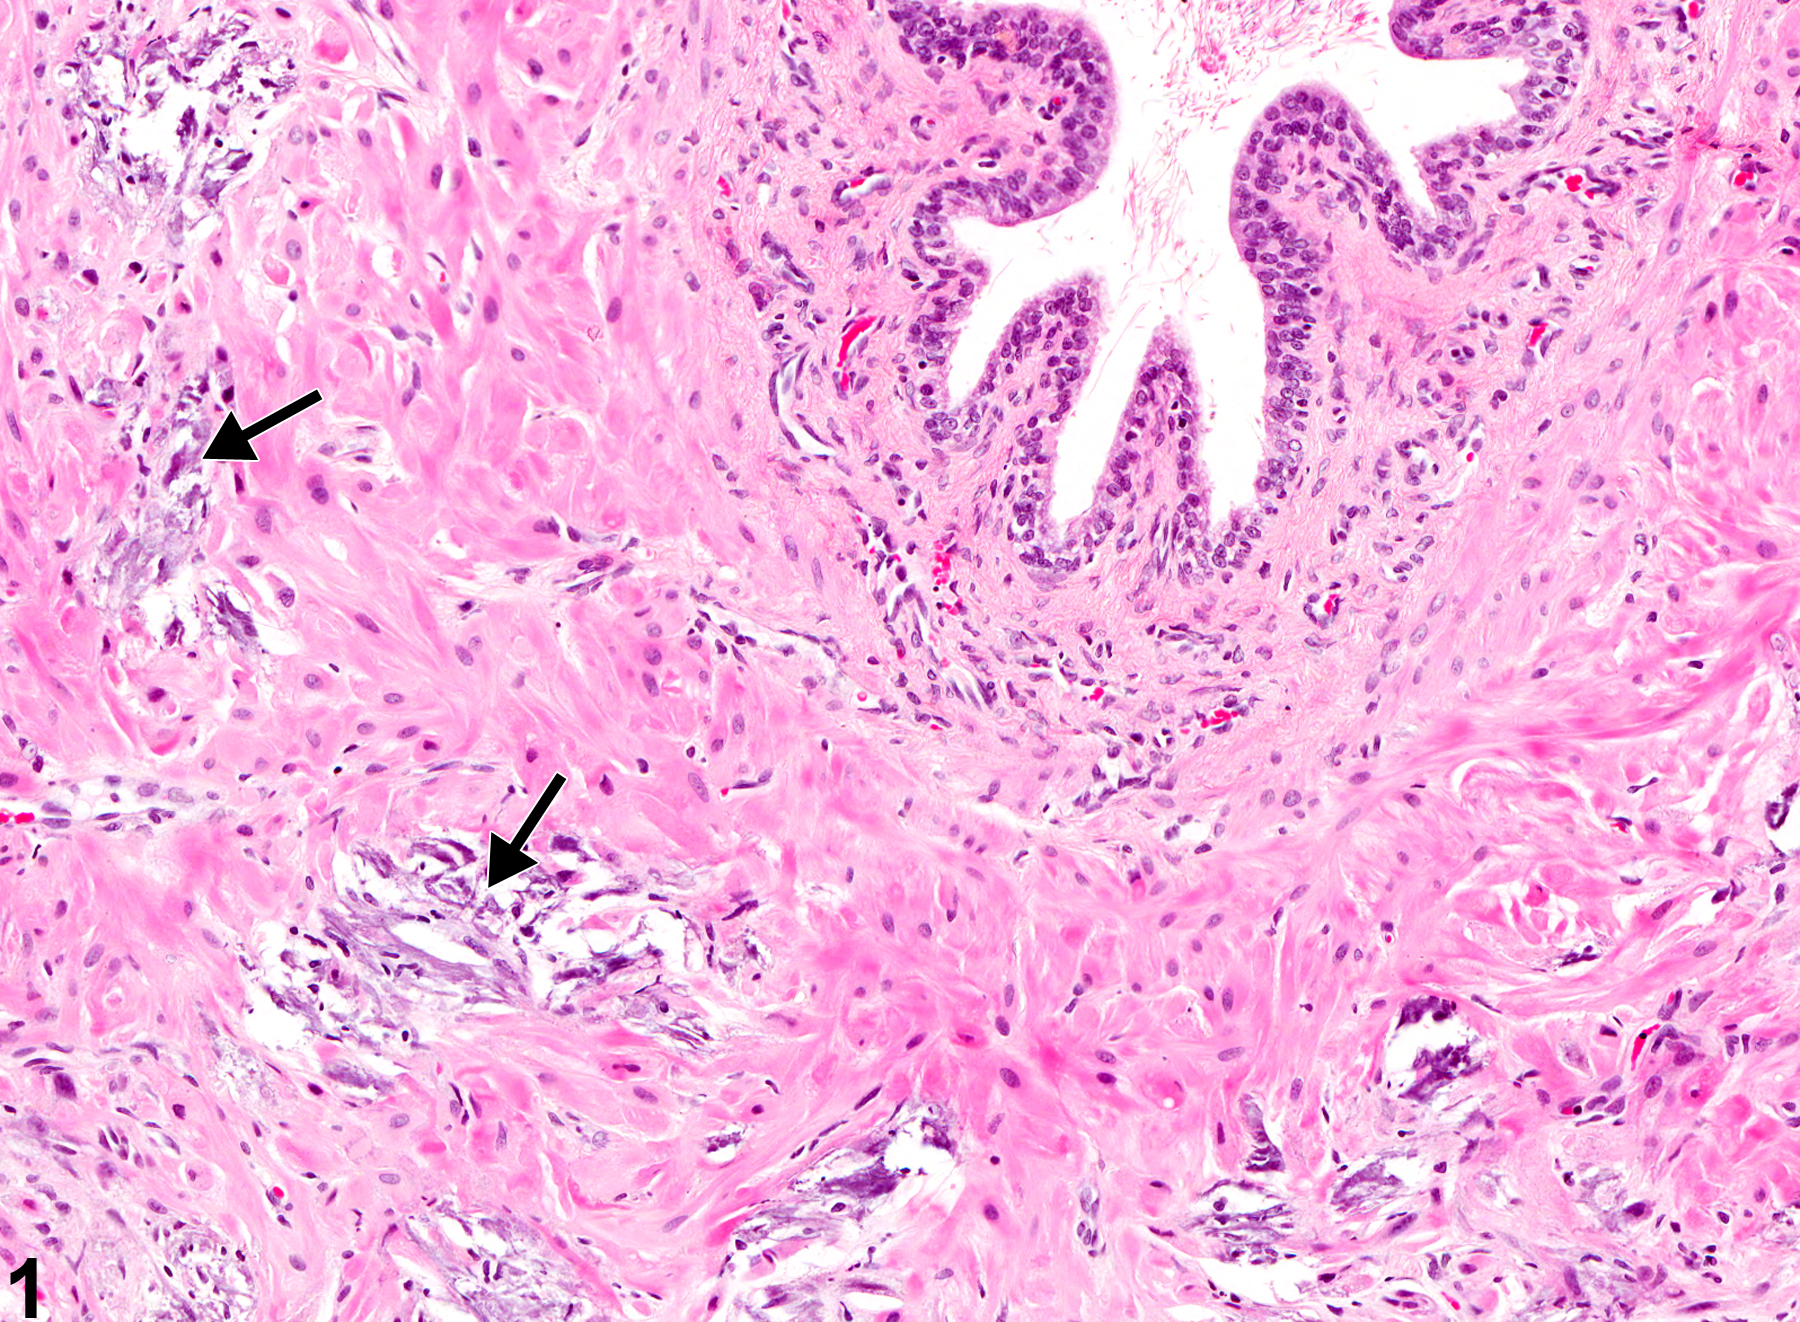 Image of mineralization in the ductus deferens from a male B6C3F1 mouse in a chronic study